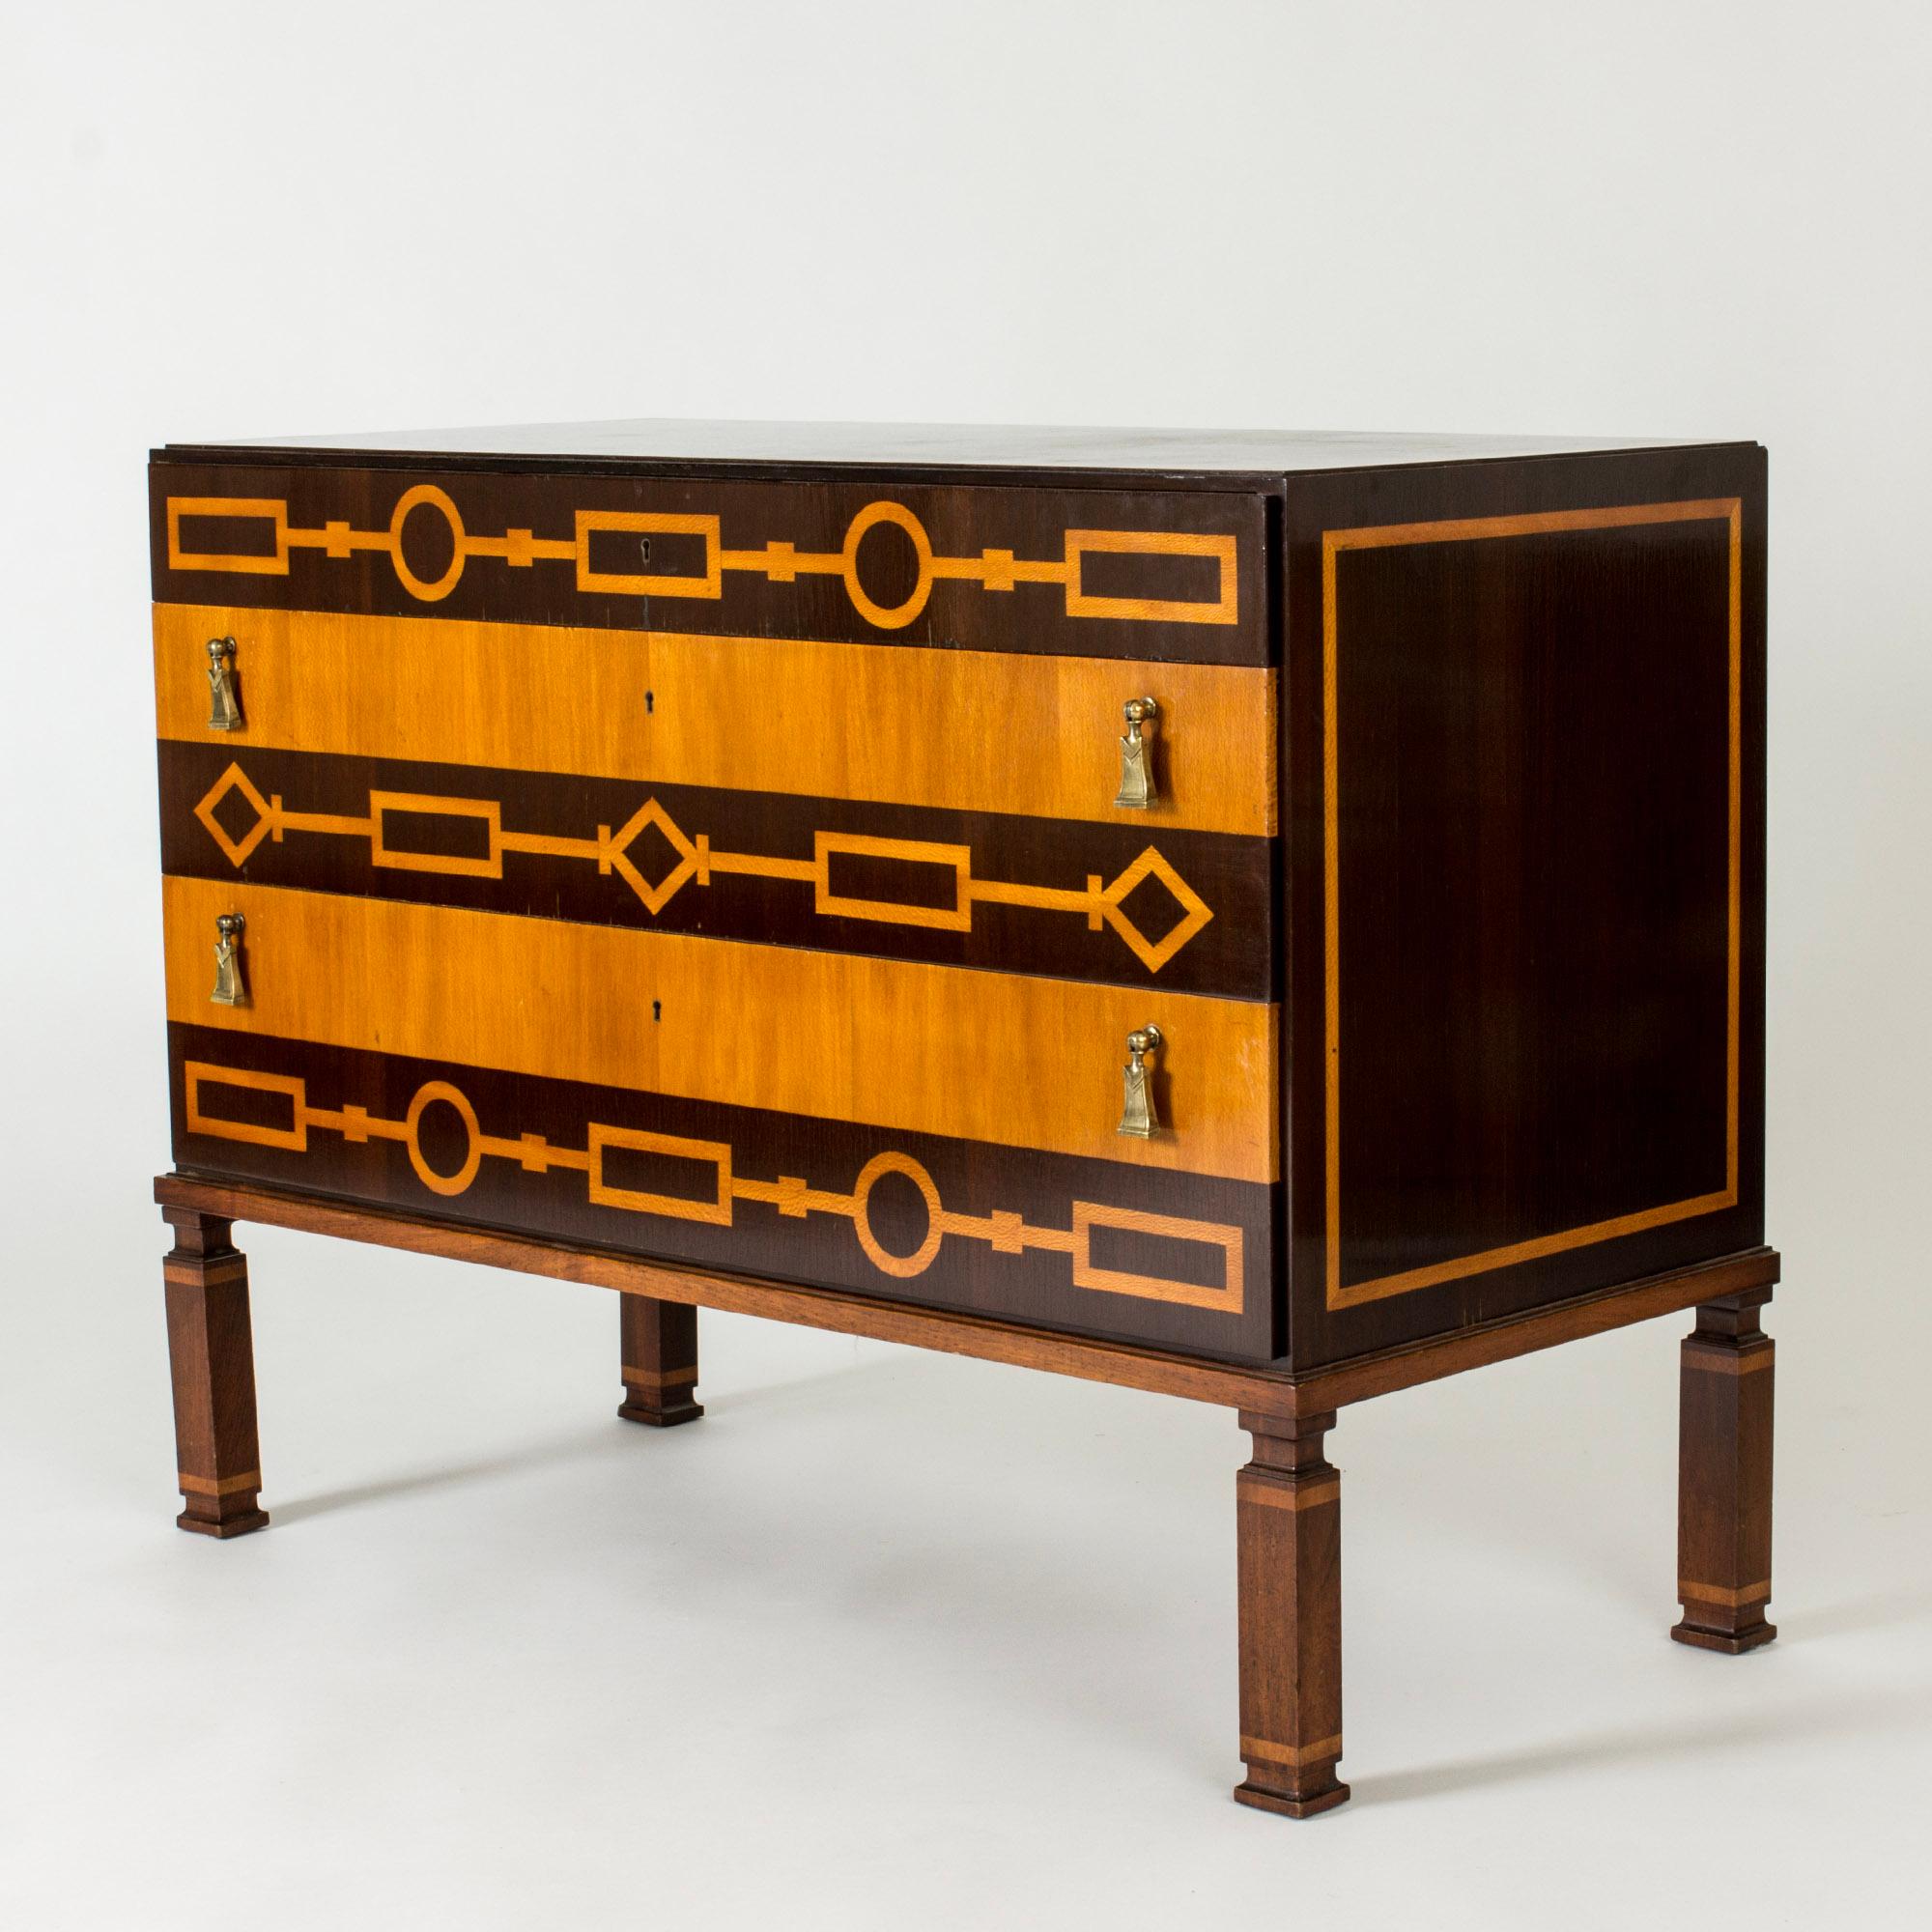 Stunning chest of drawers by Axel Einar Hjorth, made from birch with contrasting darker wood inlays. Geometrical pattern and beautifully sculpted legs in Swedish Grace style. Drawers handles in the form of brass tassels.

The model is called